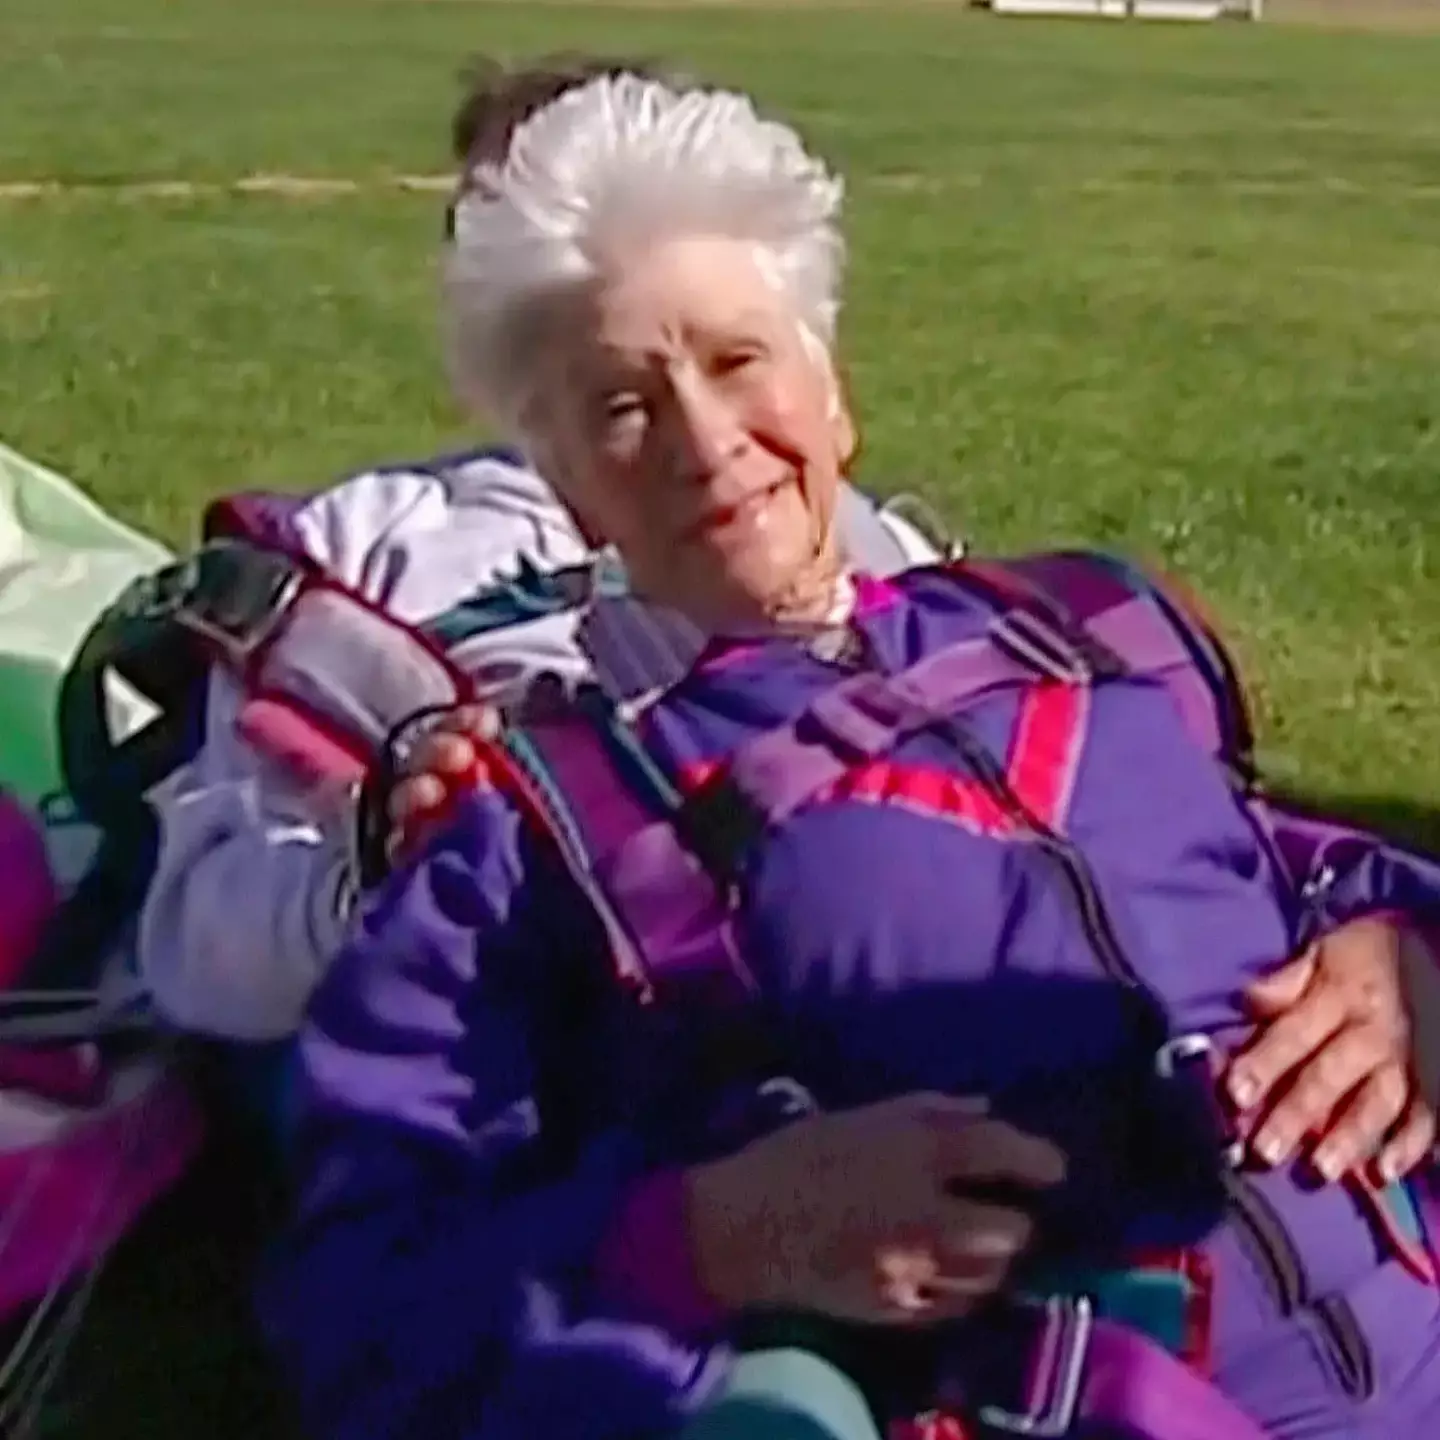 Clare Nowland was known for her zest for life and even went skydiving on her 80th birthday.